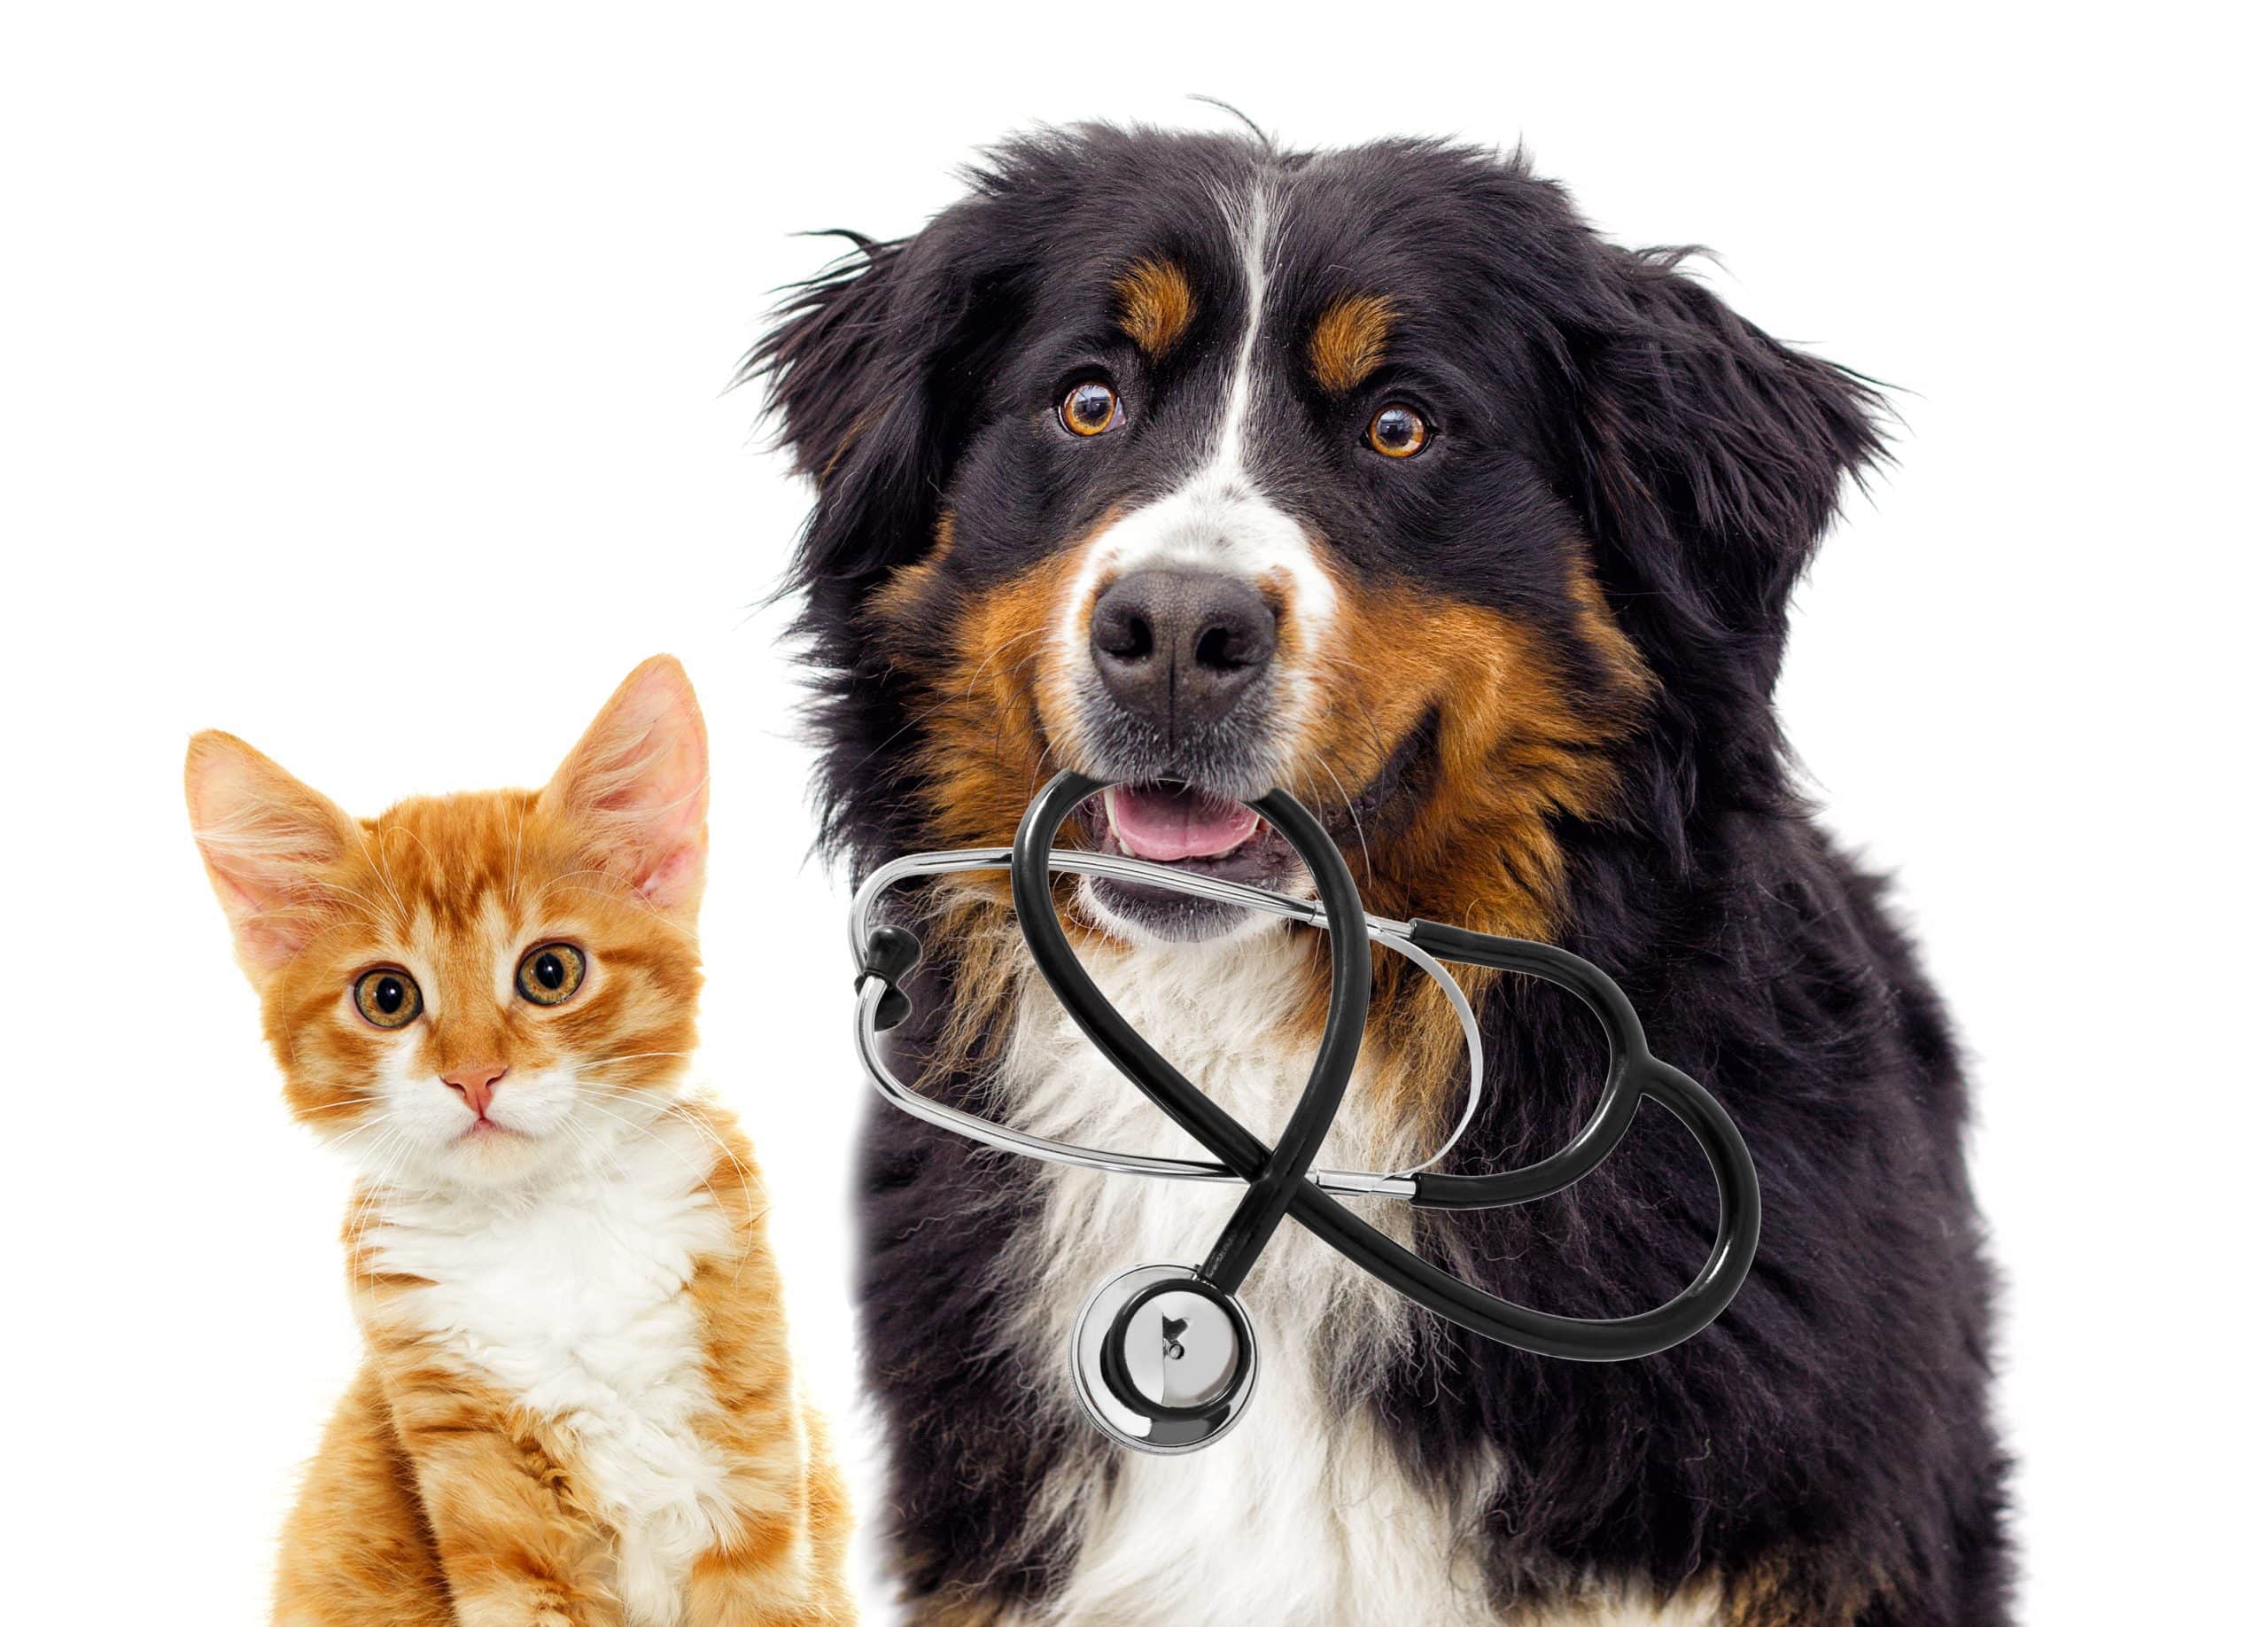 Dog with stethoscope sitting with a cat portrait style